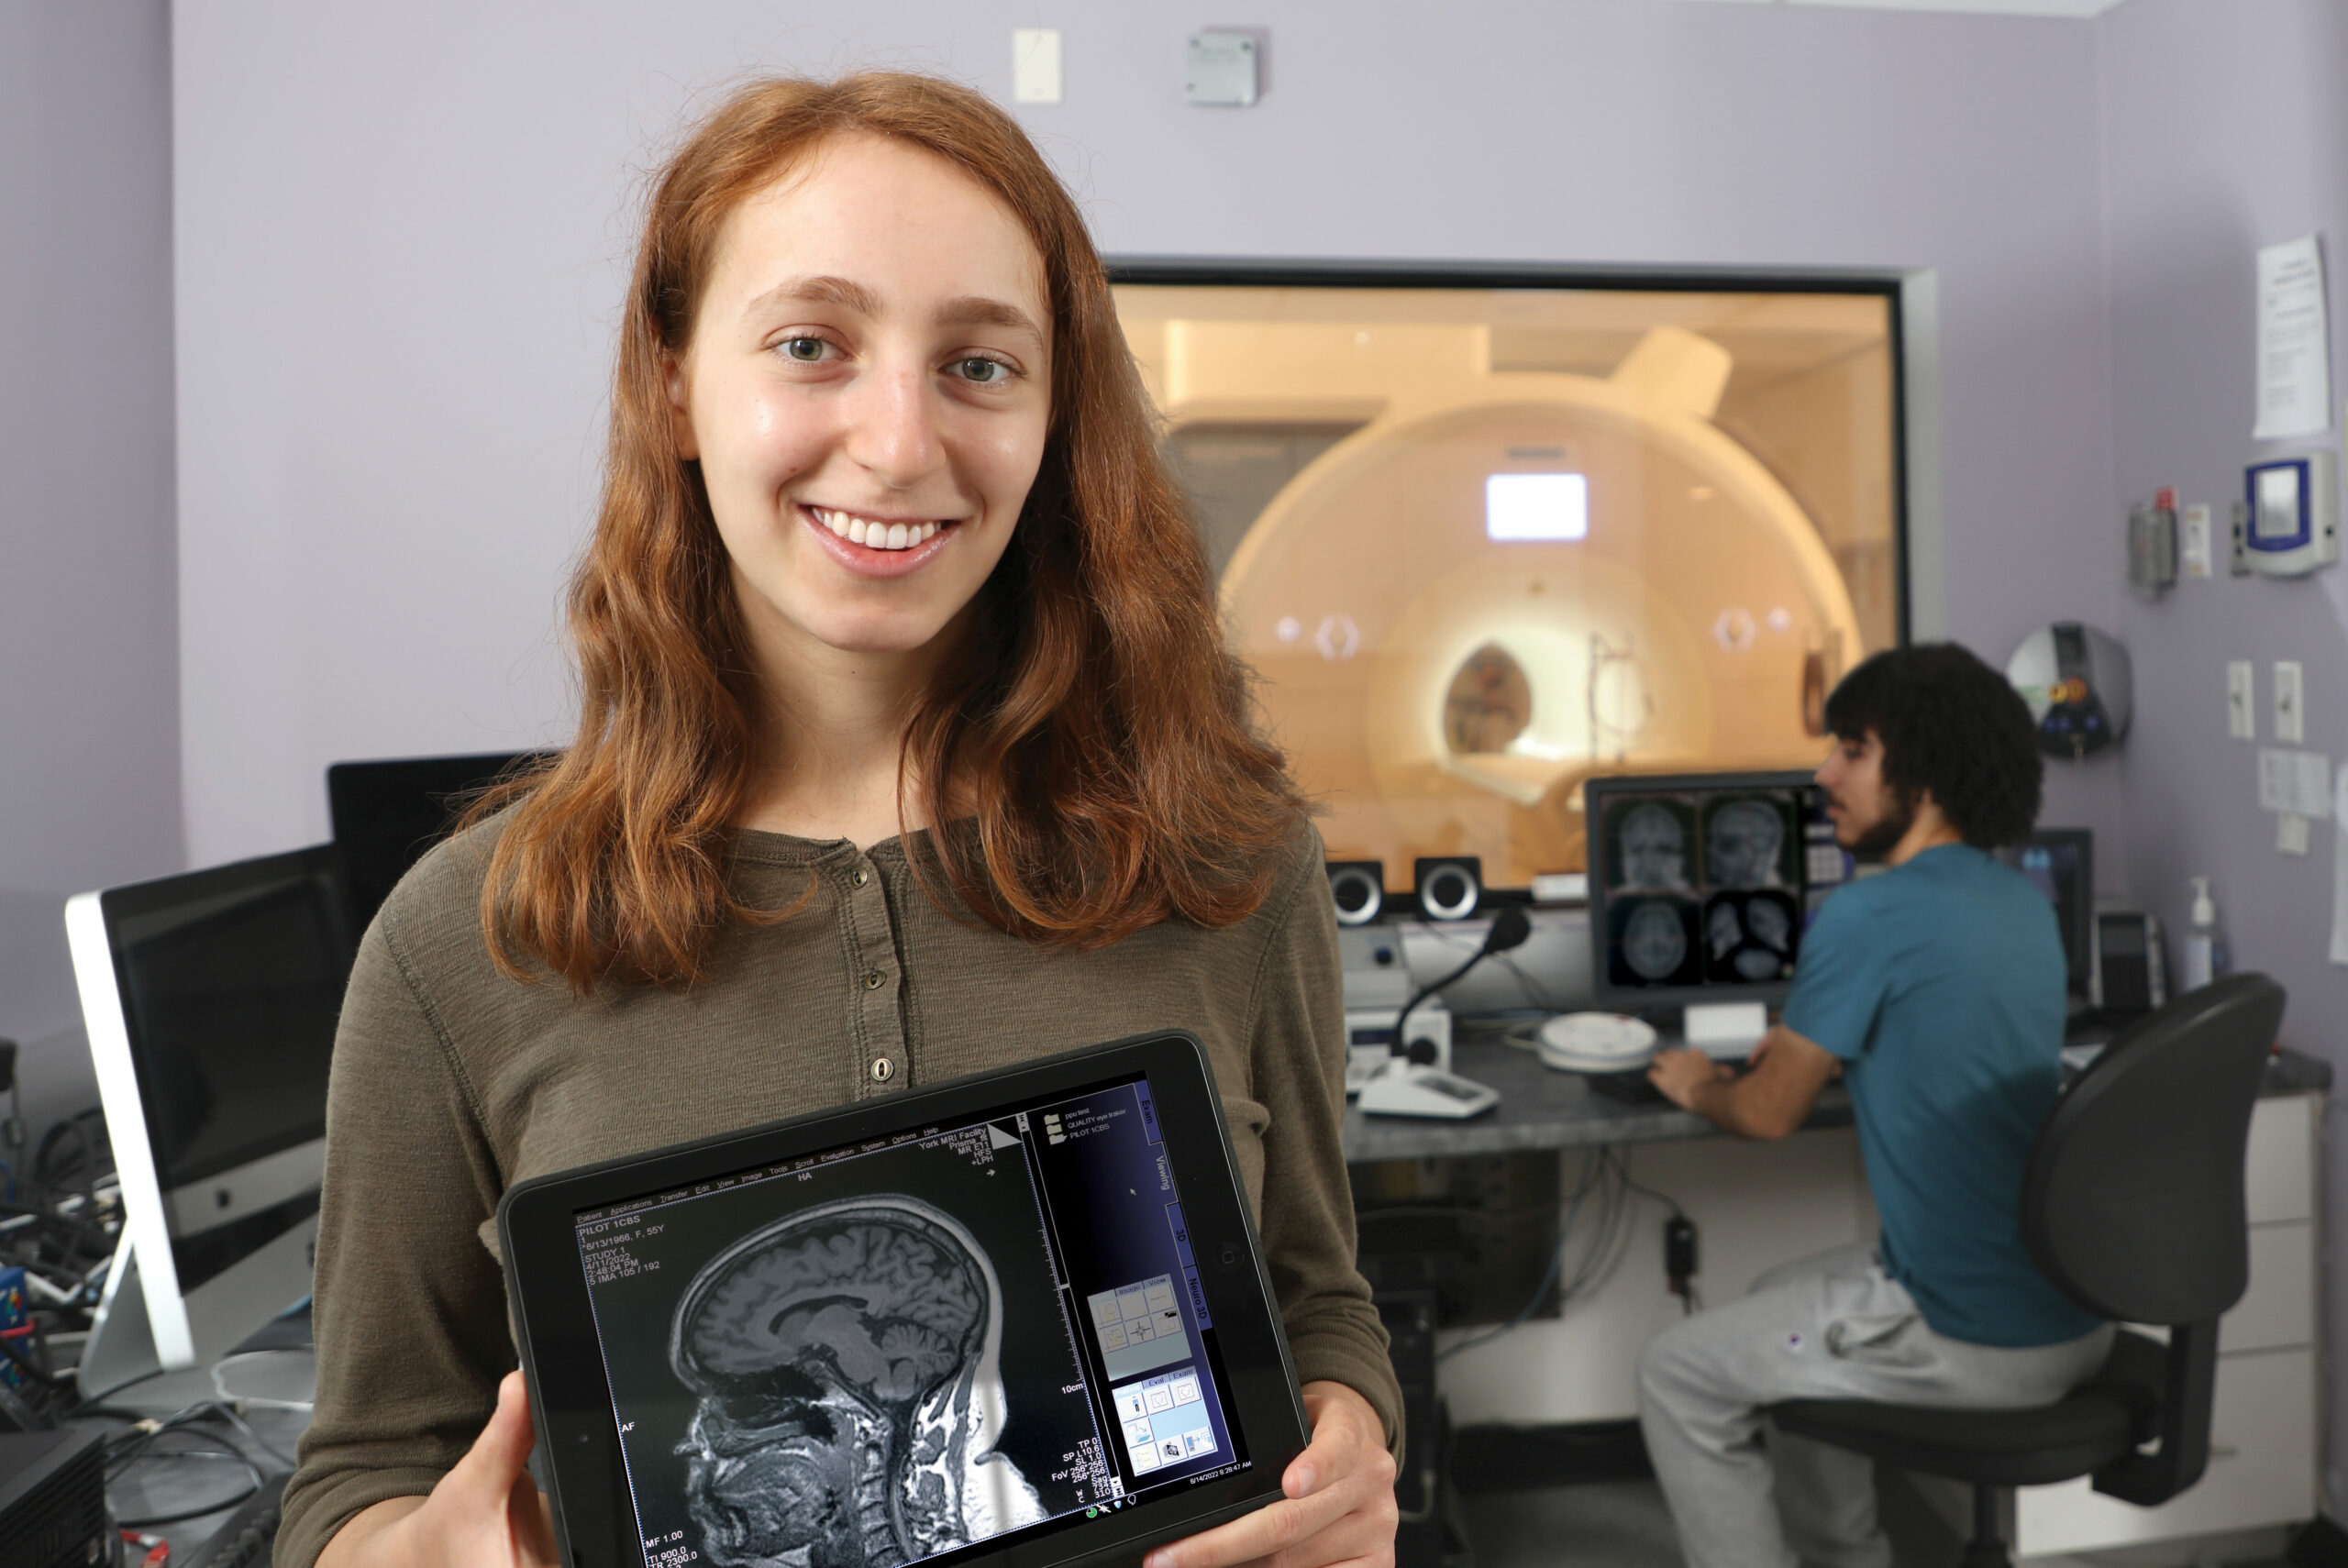 Student holding a tablet with an image of a brain on it